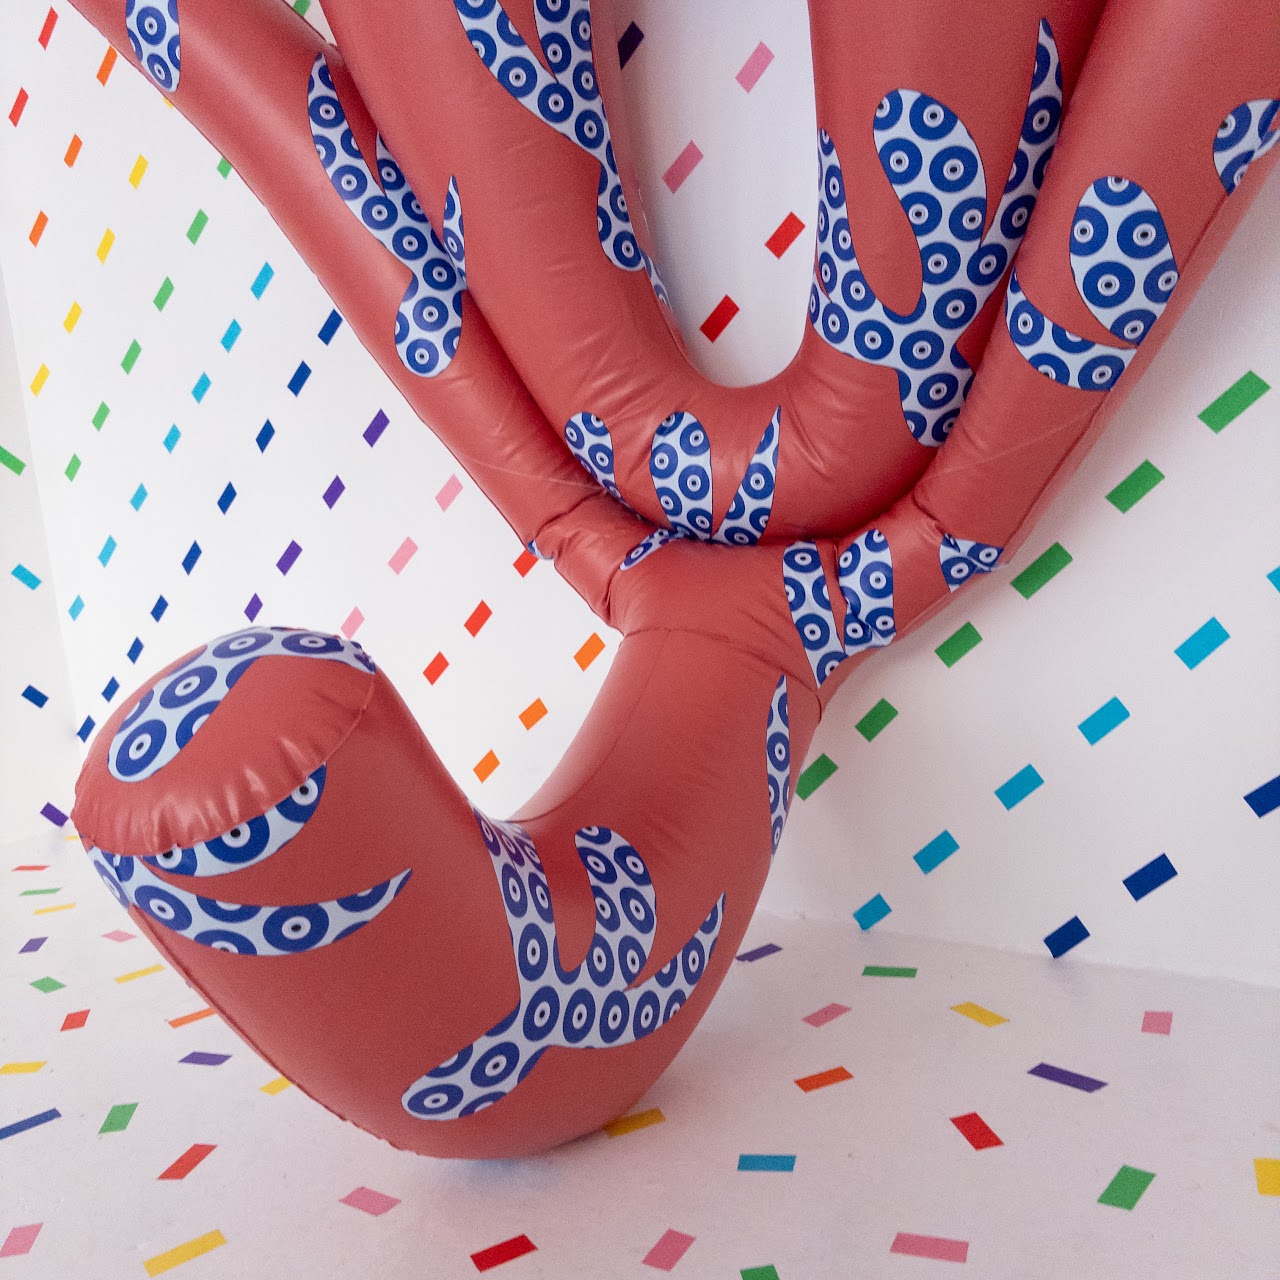 Sophia Wallace 'Evil Eye' Signed Inflatable Clitoris Sculpture #1